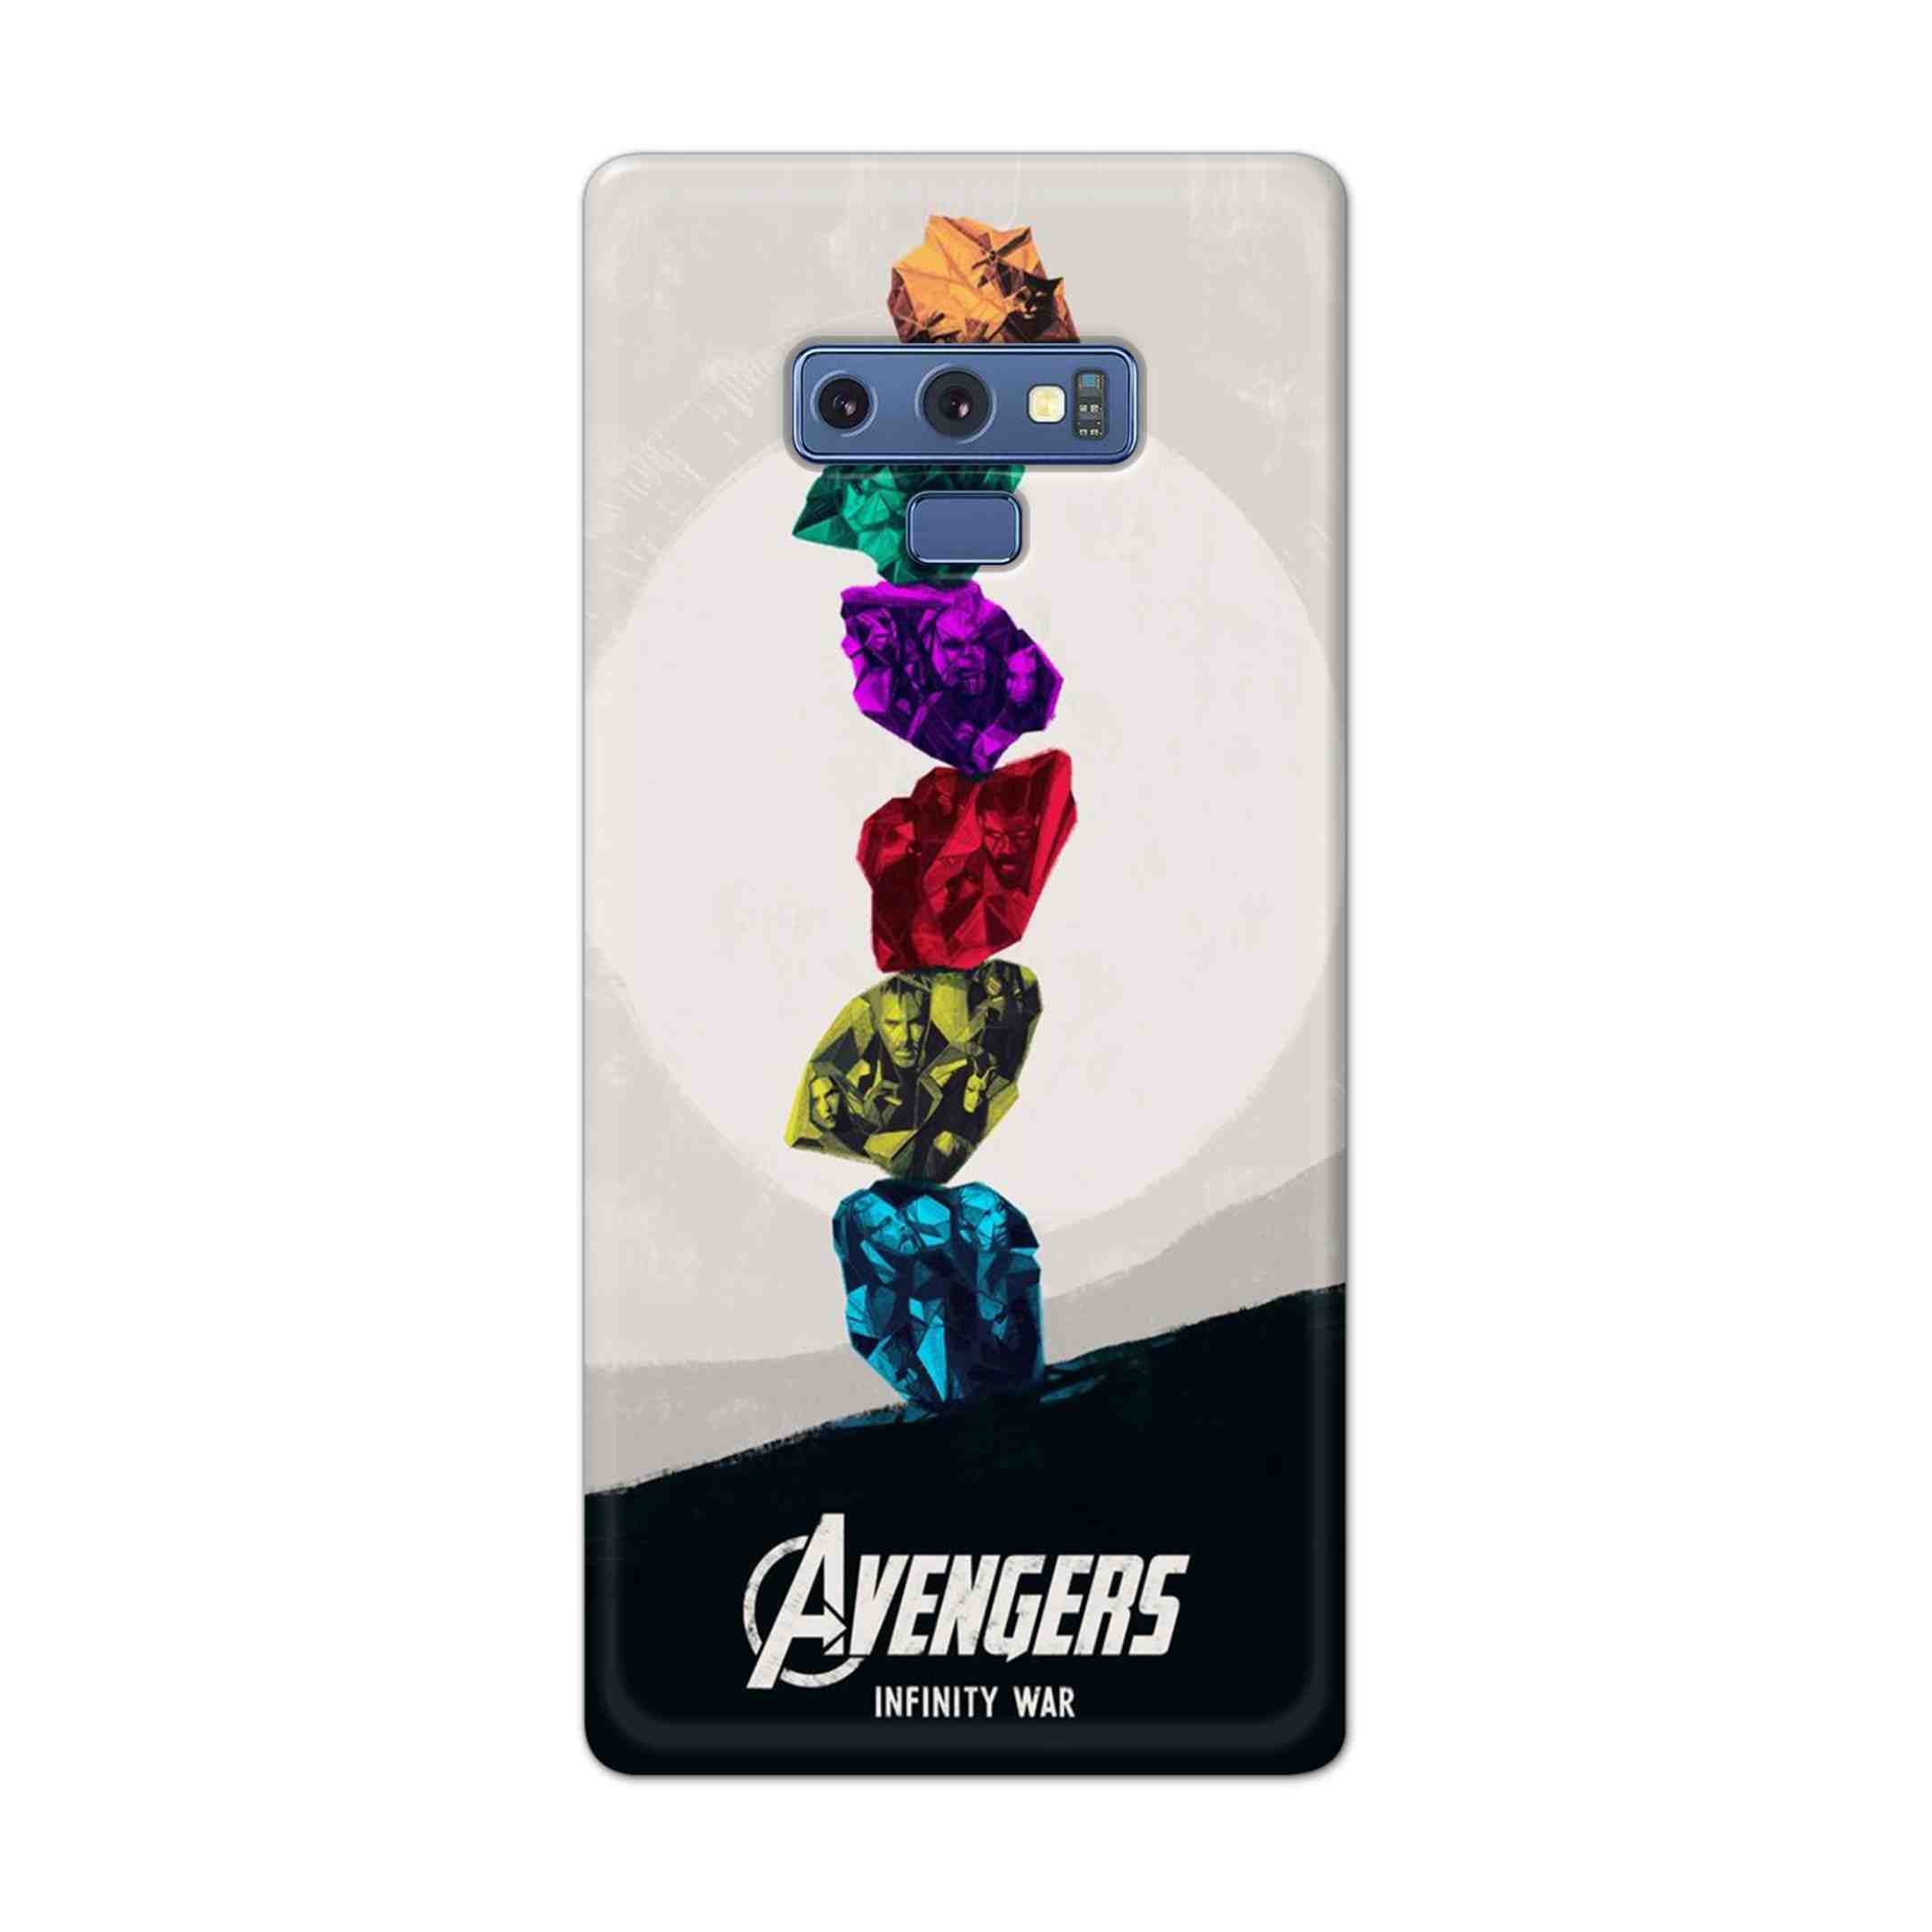 Buy Avengers Stone Hard Back Mobile Phone Case Cover For Samsung Galaxy Note 9 Online